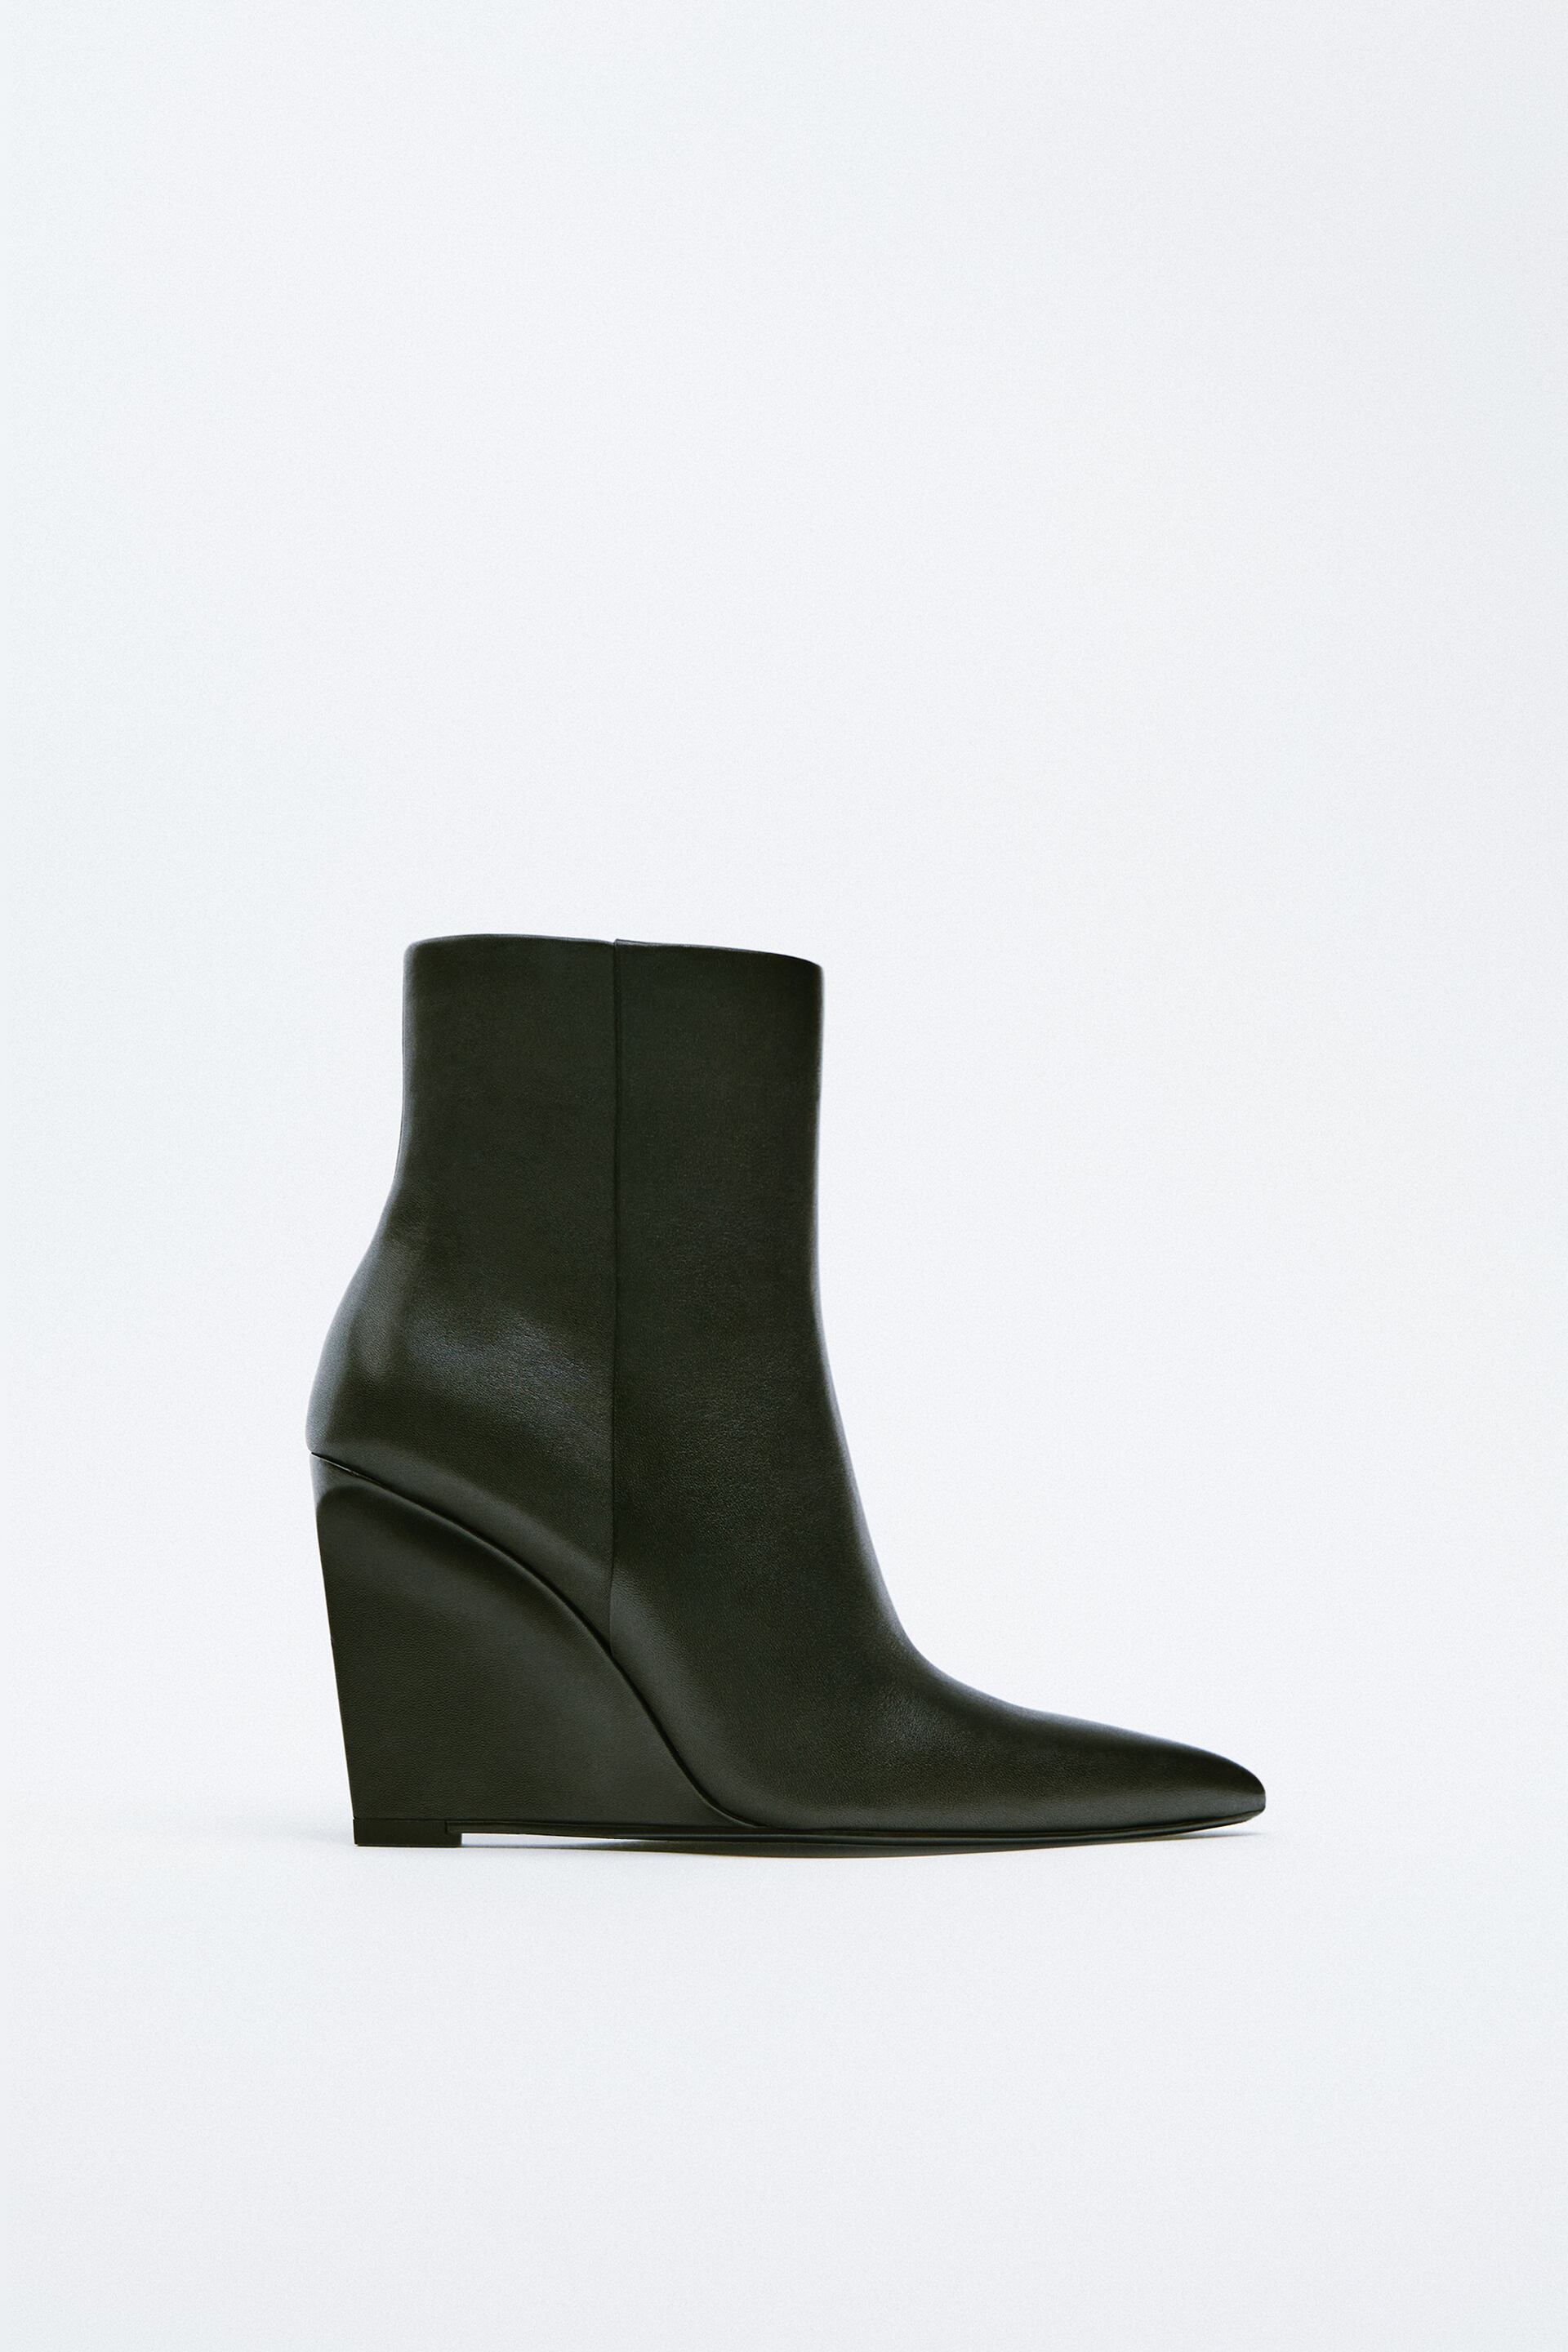 Zara LEATHER WEDGE ANKLE BOOTS - 147739114-040-